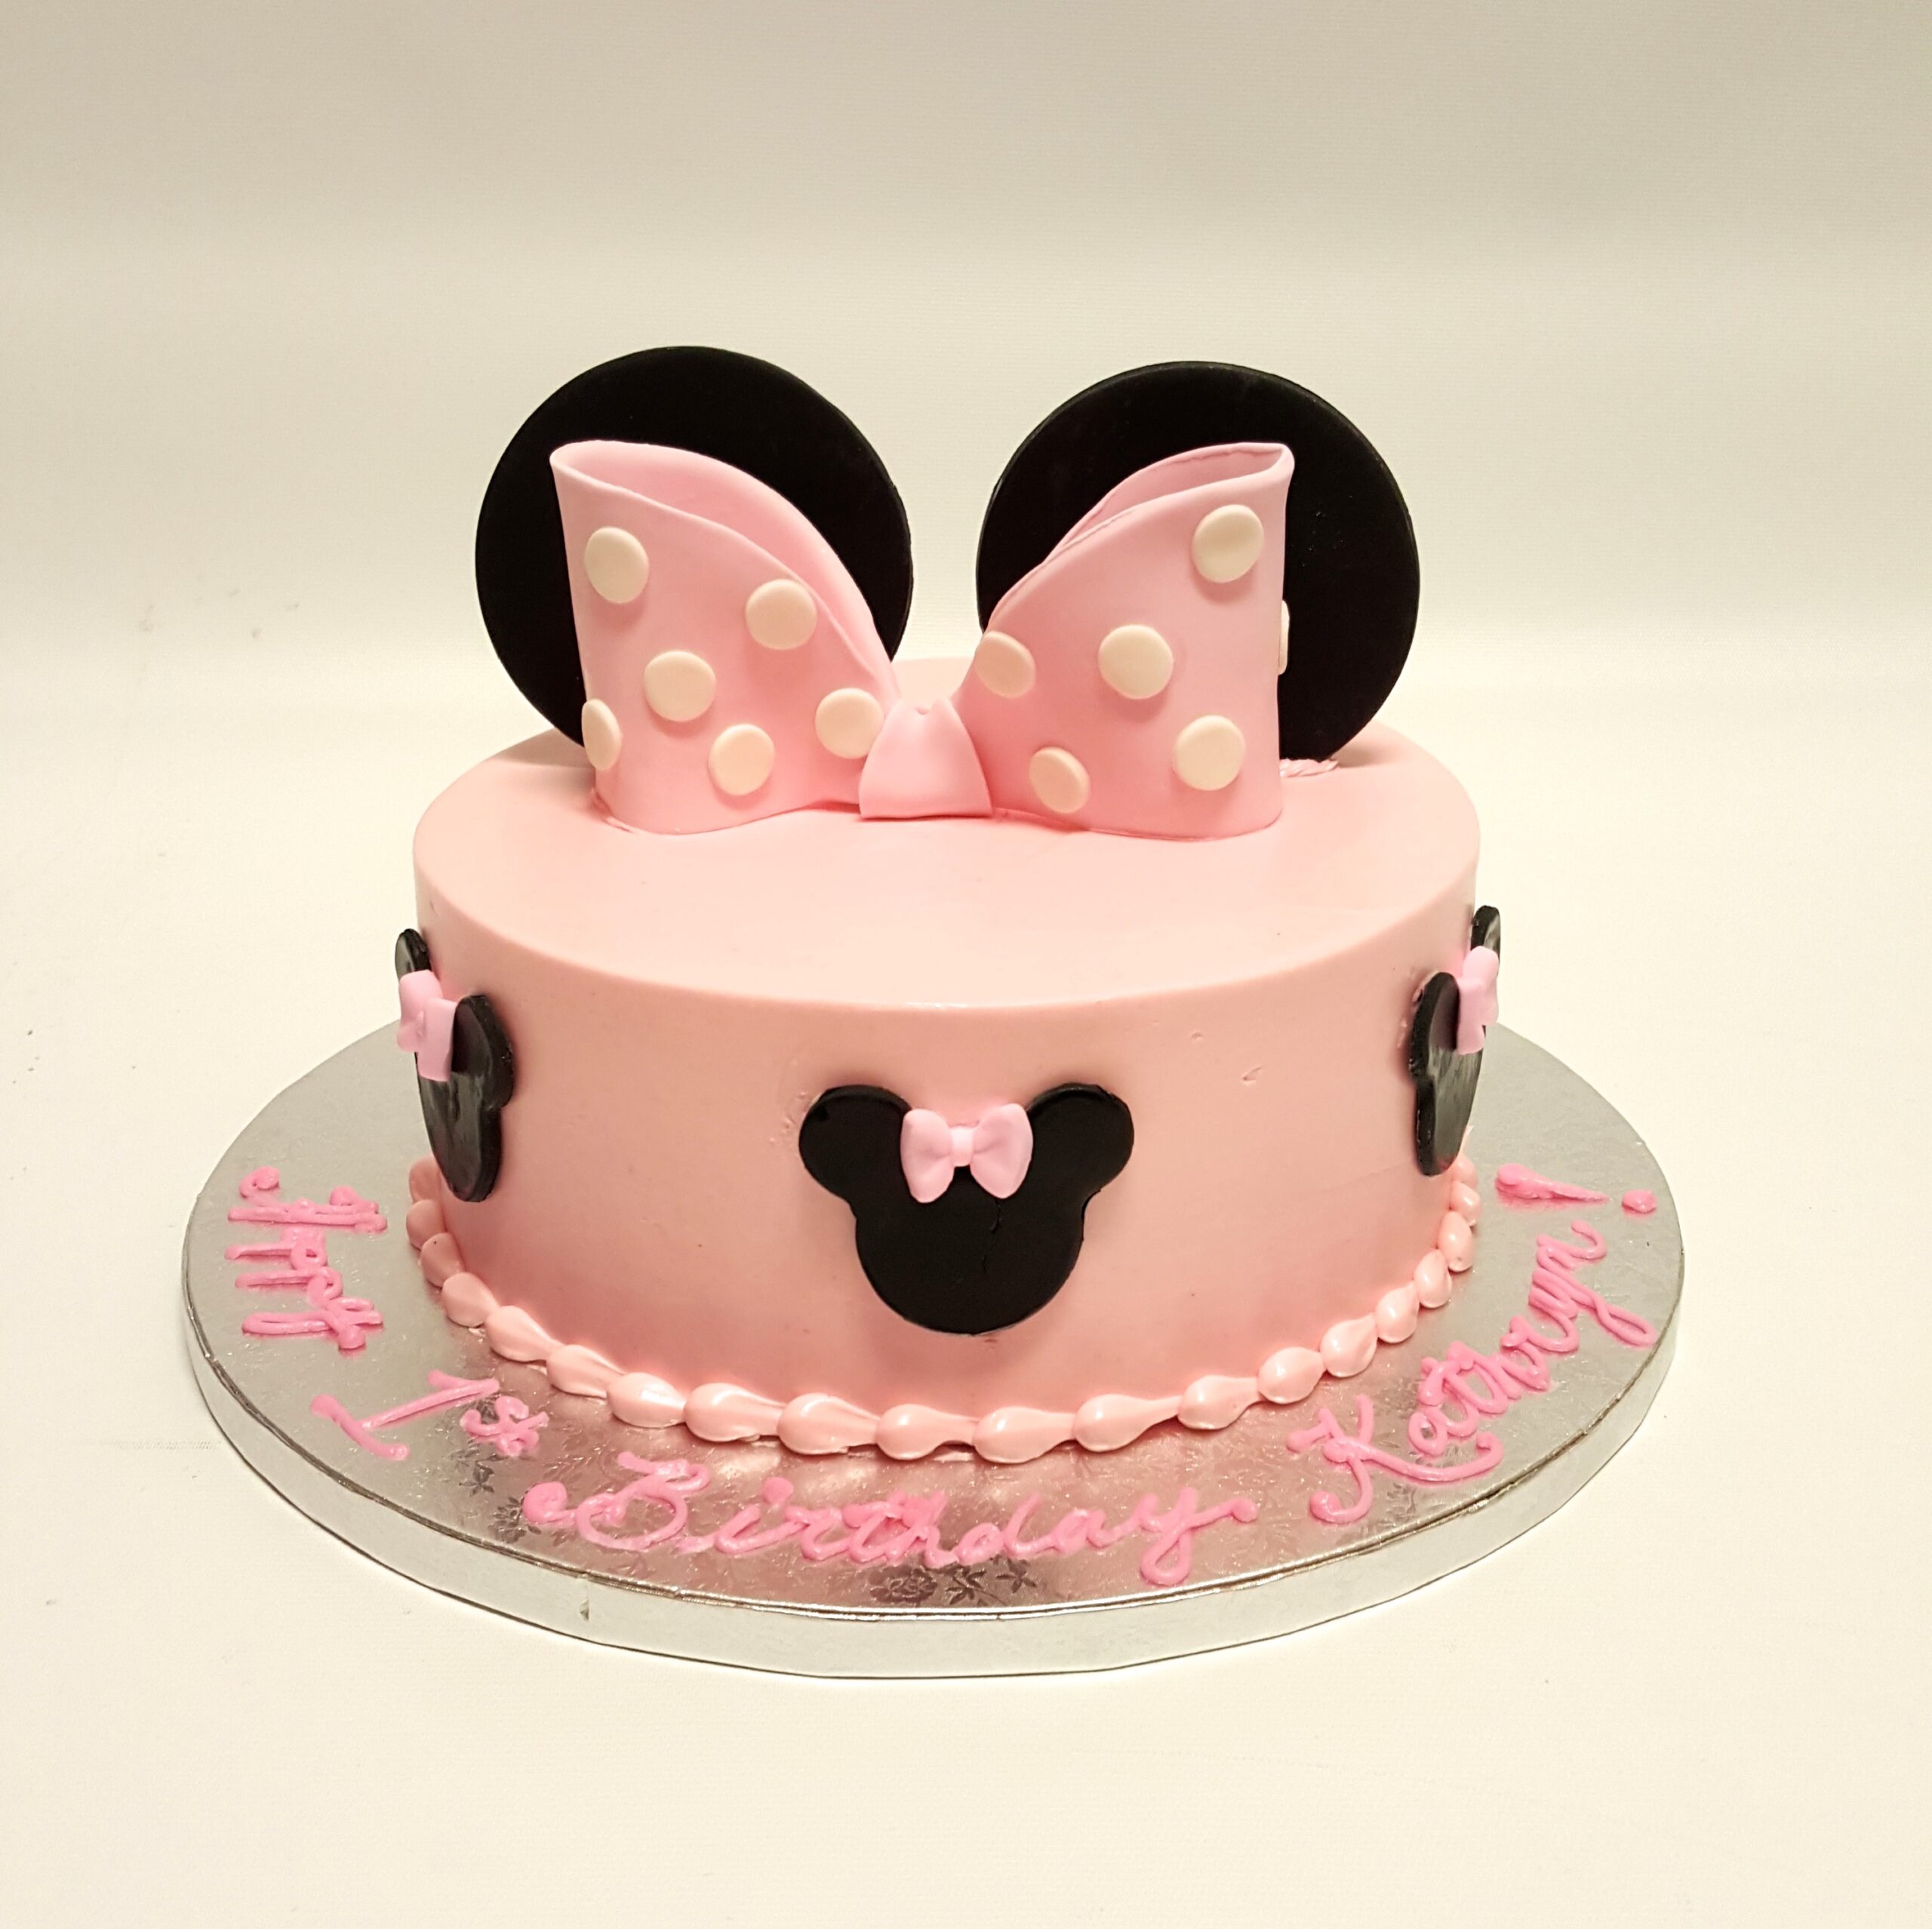 Minnie Mouse Cake No.2 | Little Hill Cakes